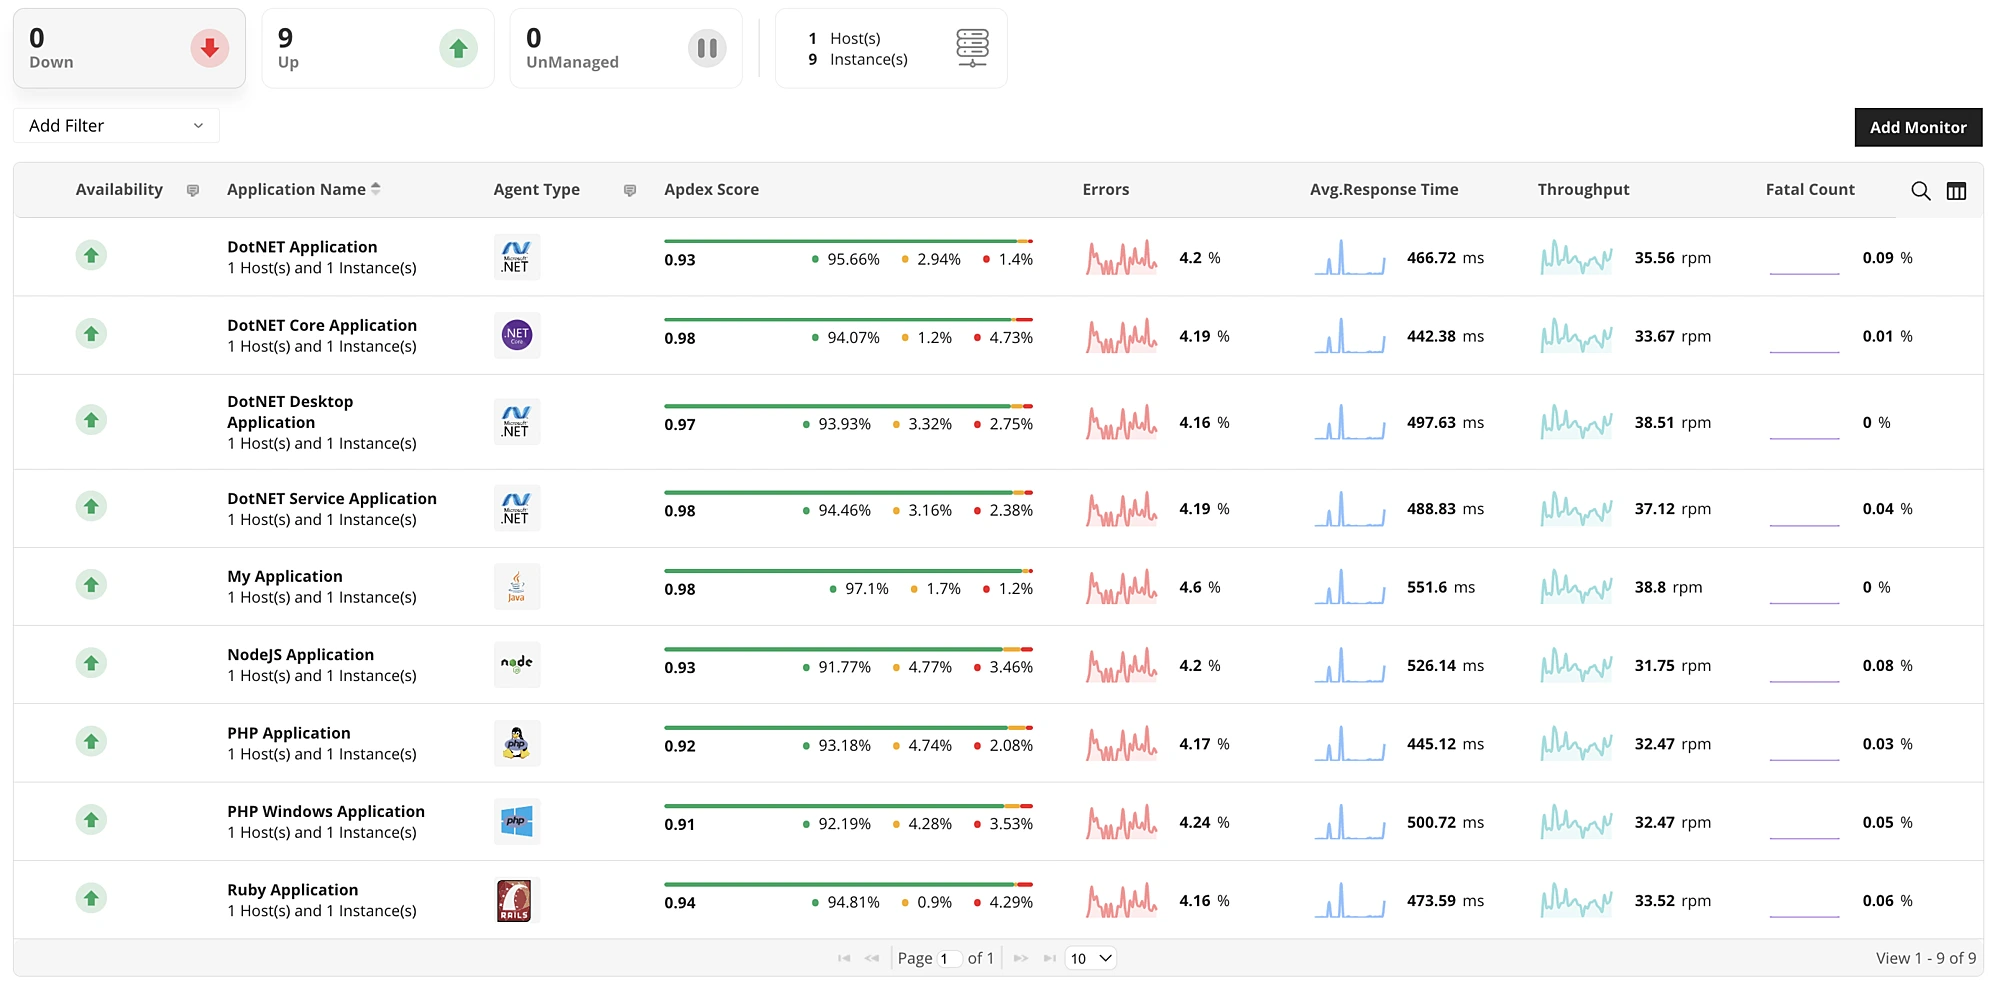 ManageEngine Applications Manager showing application performance monitoring support for multiple platforms